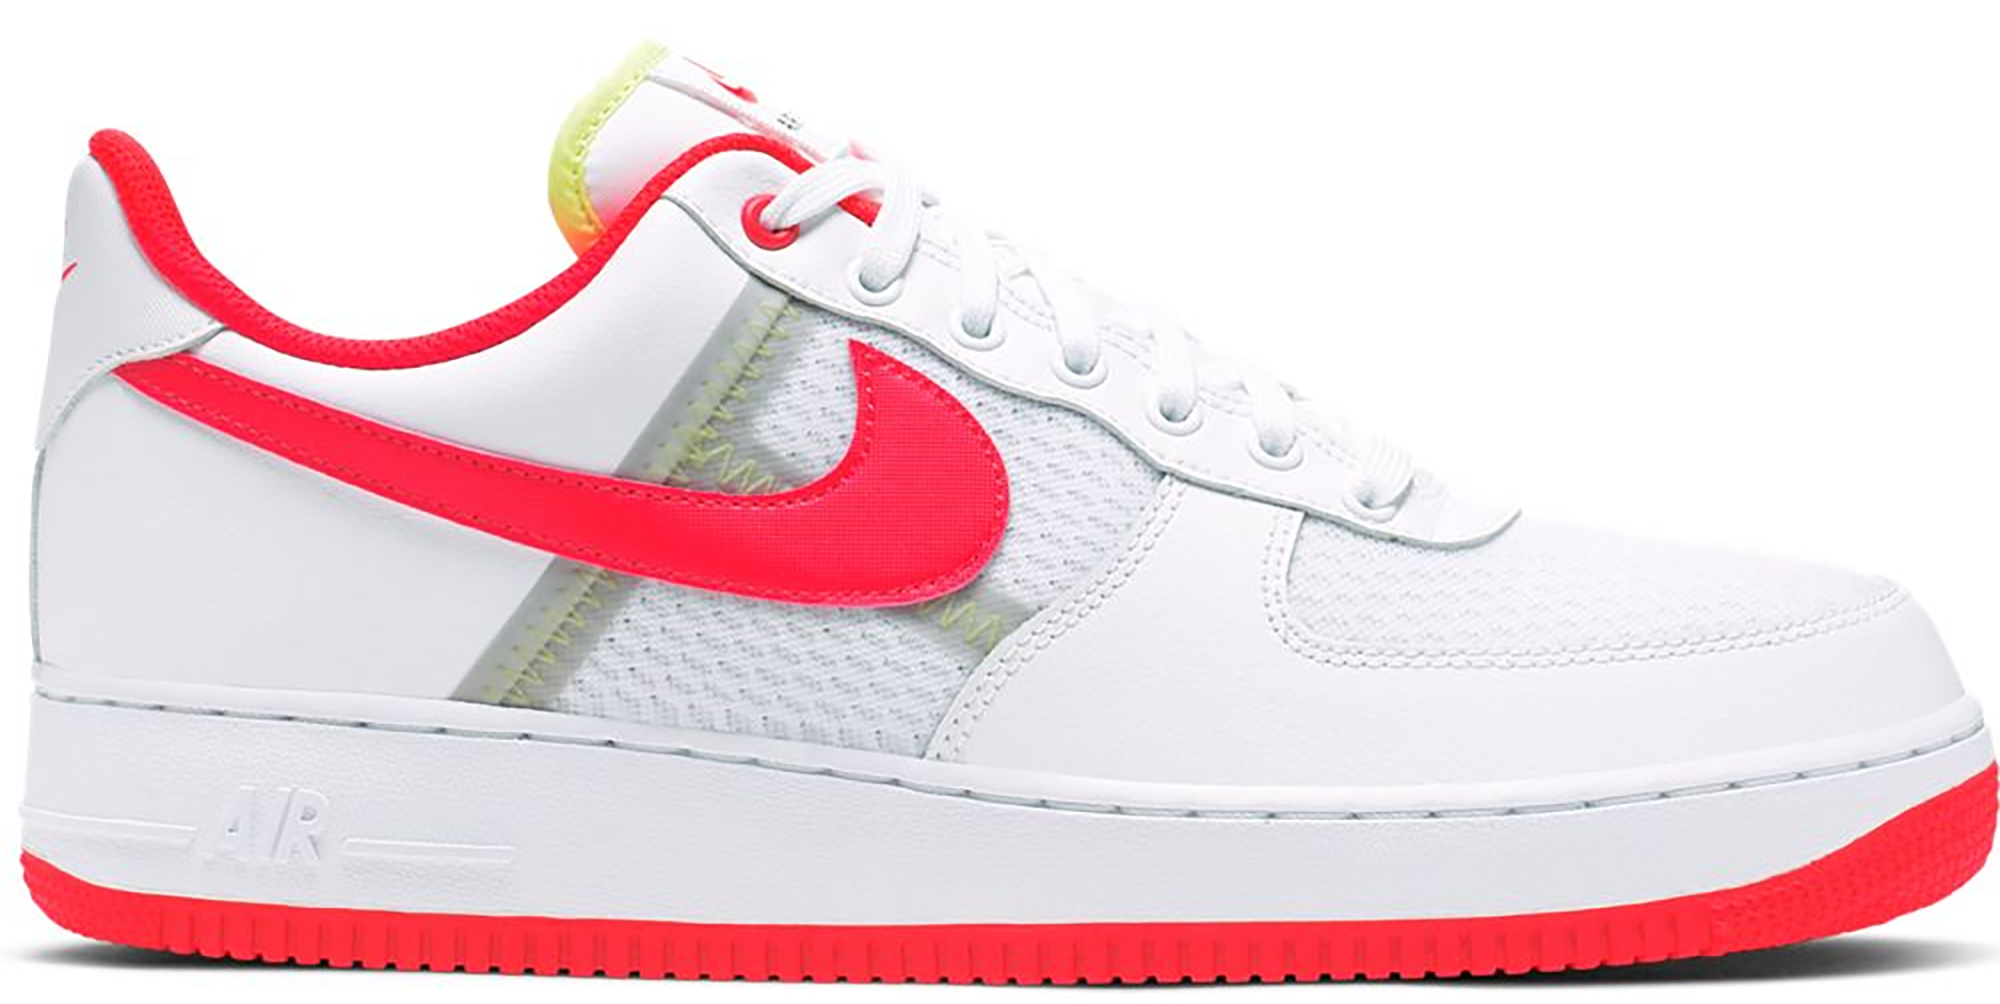 nike air force 1 translucent